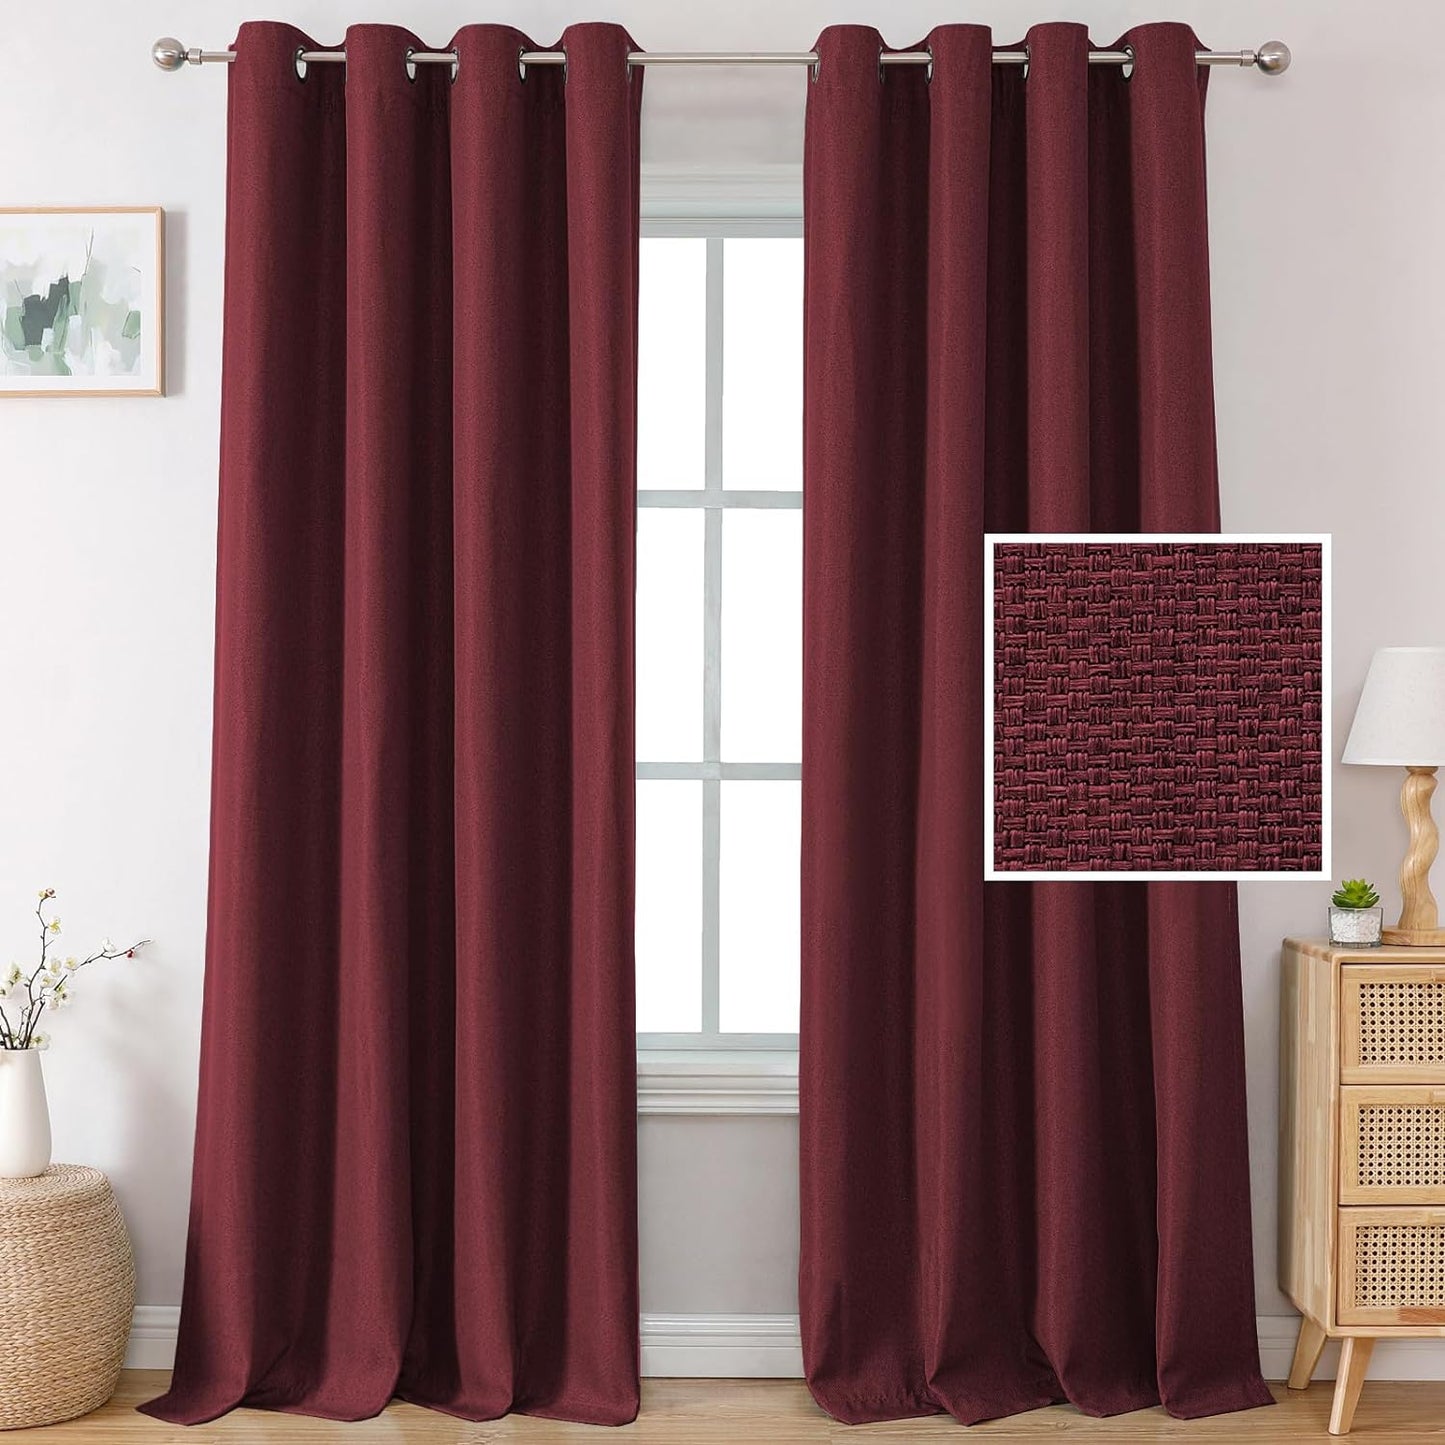 H.VERSAILTEX Linen Blackout Curtains 84 Inches Long Thermal Insulated Room Darkening Linen Curtains for Bedroom Textured Burlap Grommet Window Curtains for Living Room, Bluestone and Taupe, 2 Panels  H.VERSAILTEX Burgundy 52"W X 96"L 